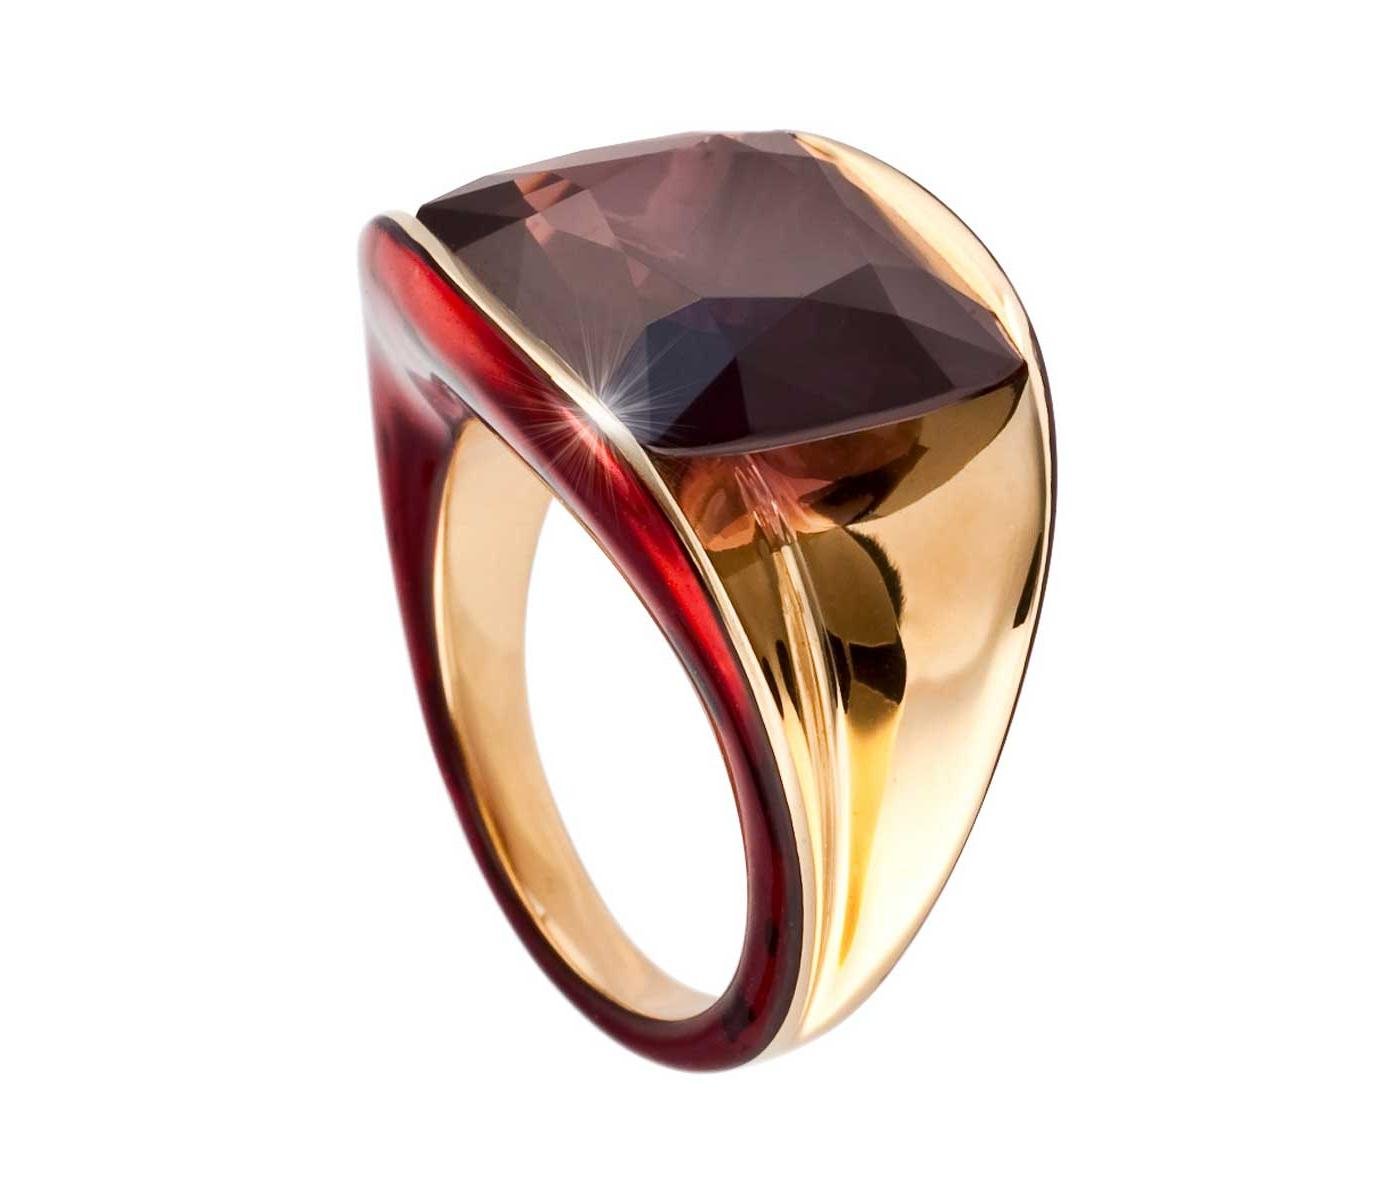 Ring by Dietrich